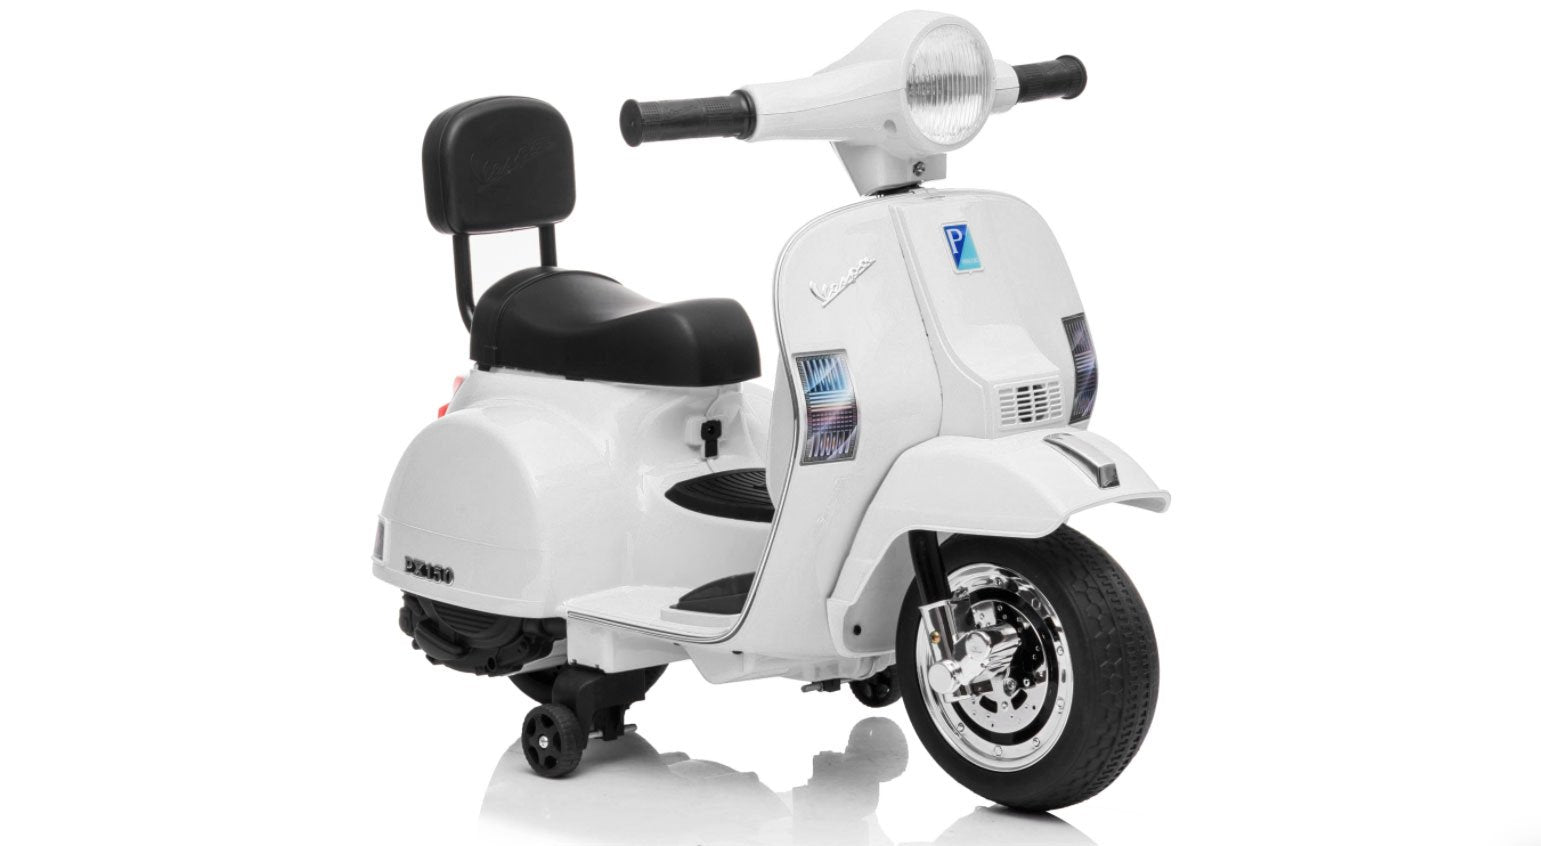 Best Ride On Cars Kids Vespa Scooter 6V With Forward-Backward Witch